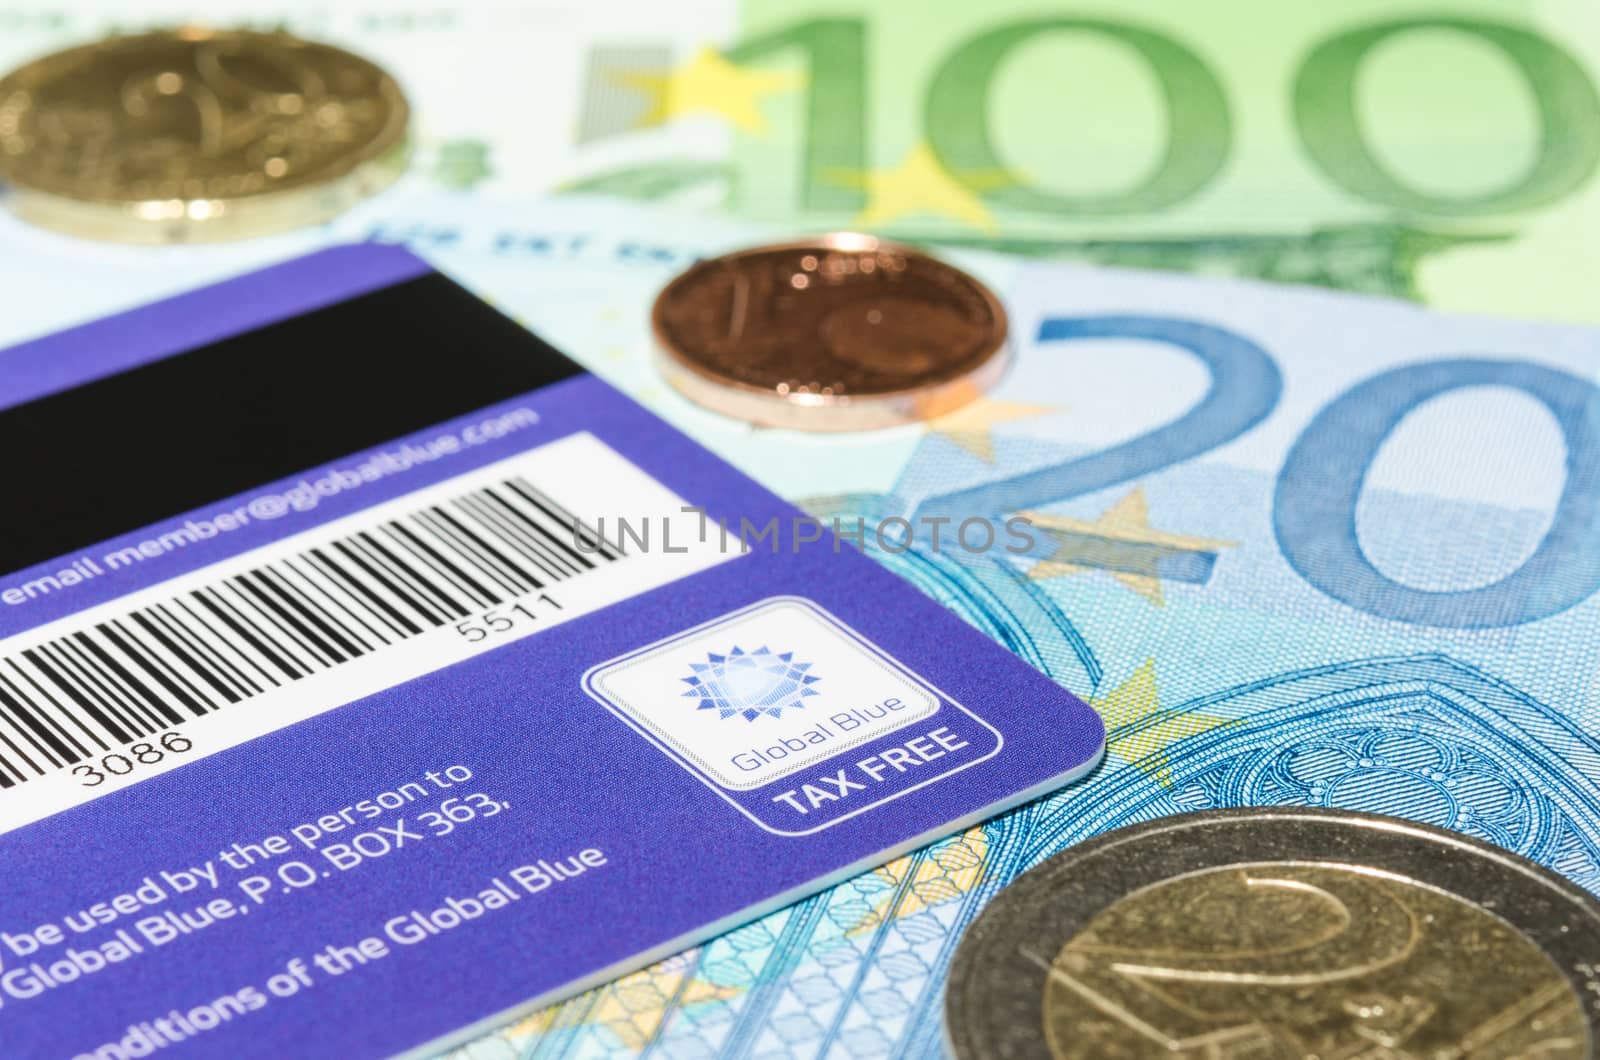 MUNICH, GERMANY - FEBRUARY 24, 2014: Closeup logotype Global Blue on the backside of plastic card against Euro cash